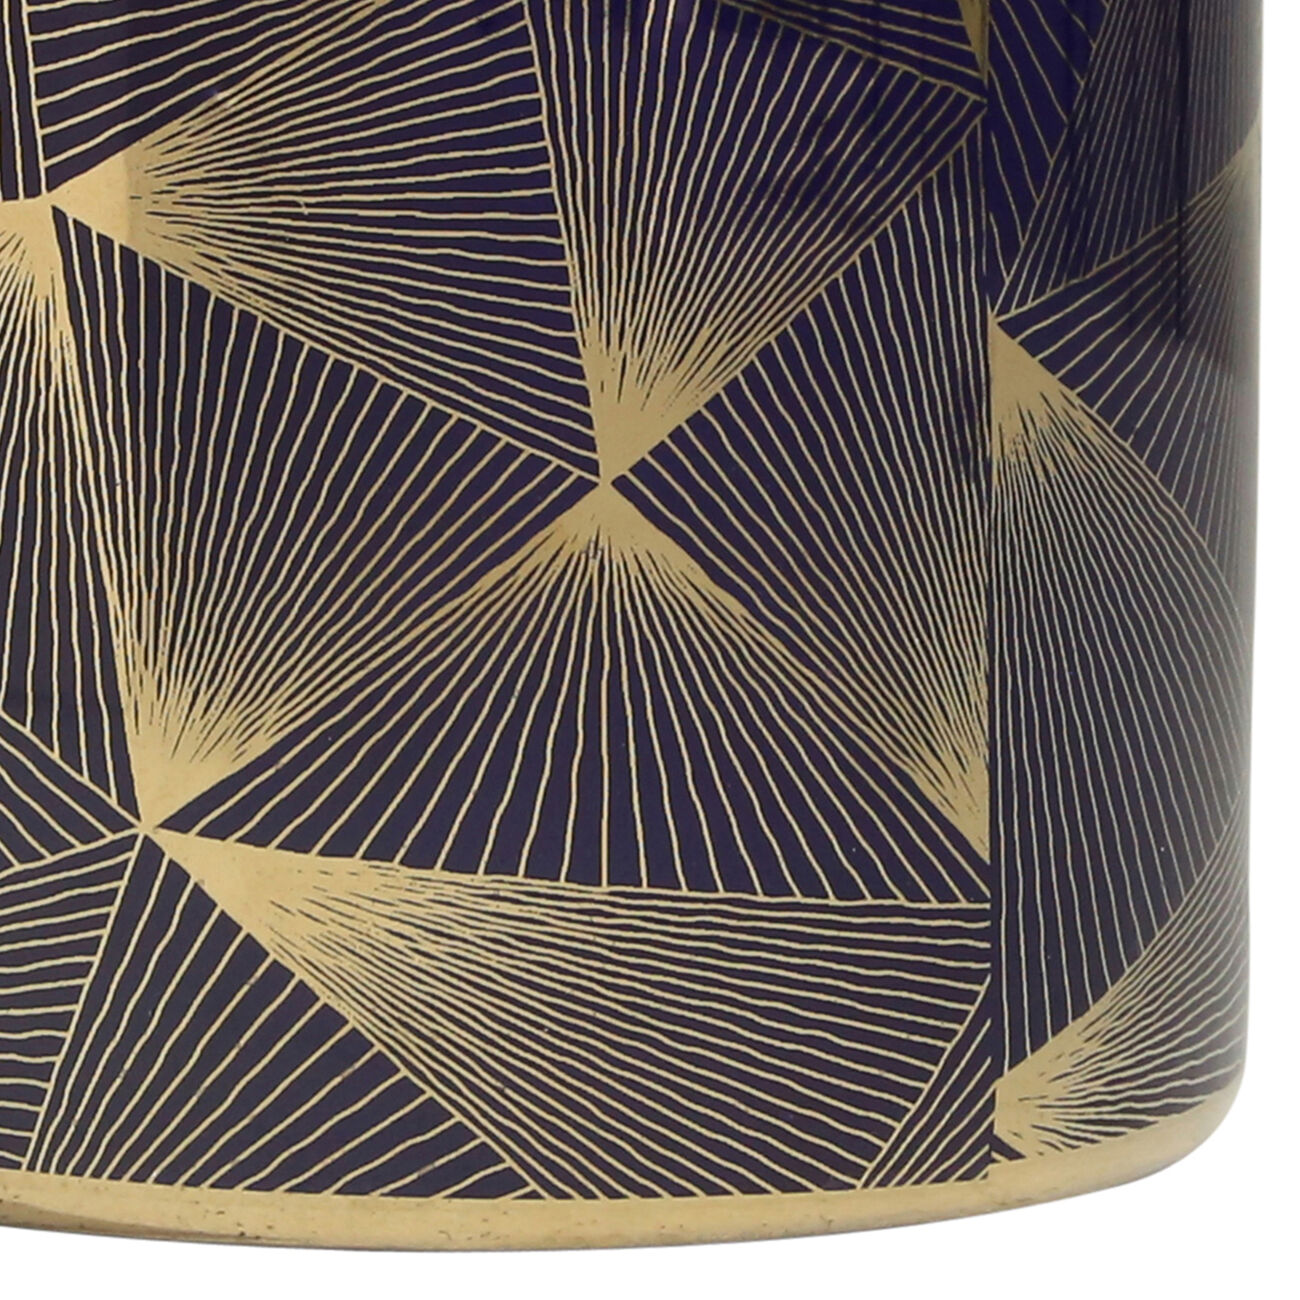 Contemporary Styled Ceramic Jar with Fine Patterns, Blue and Gold, Large